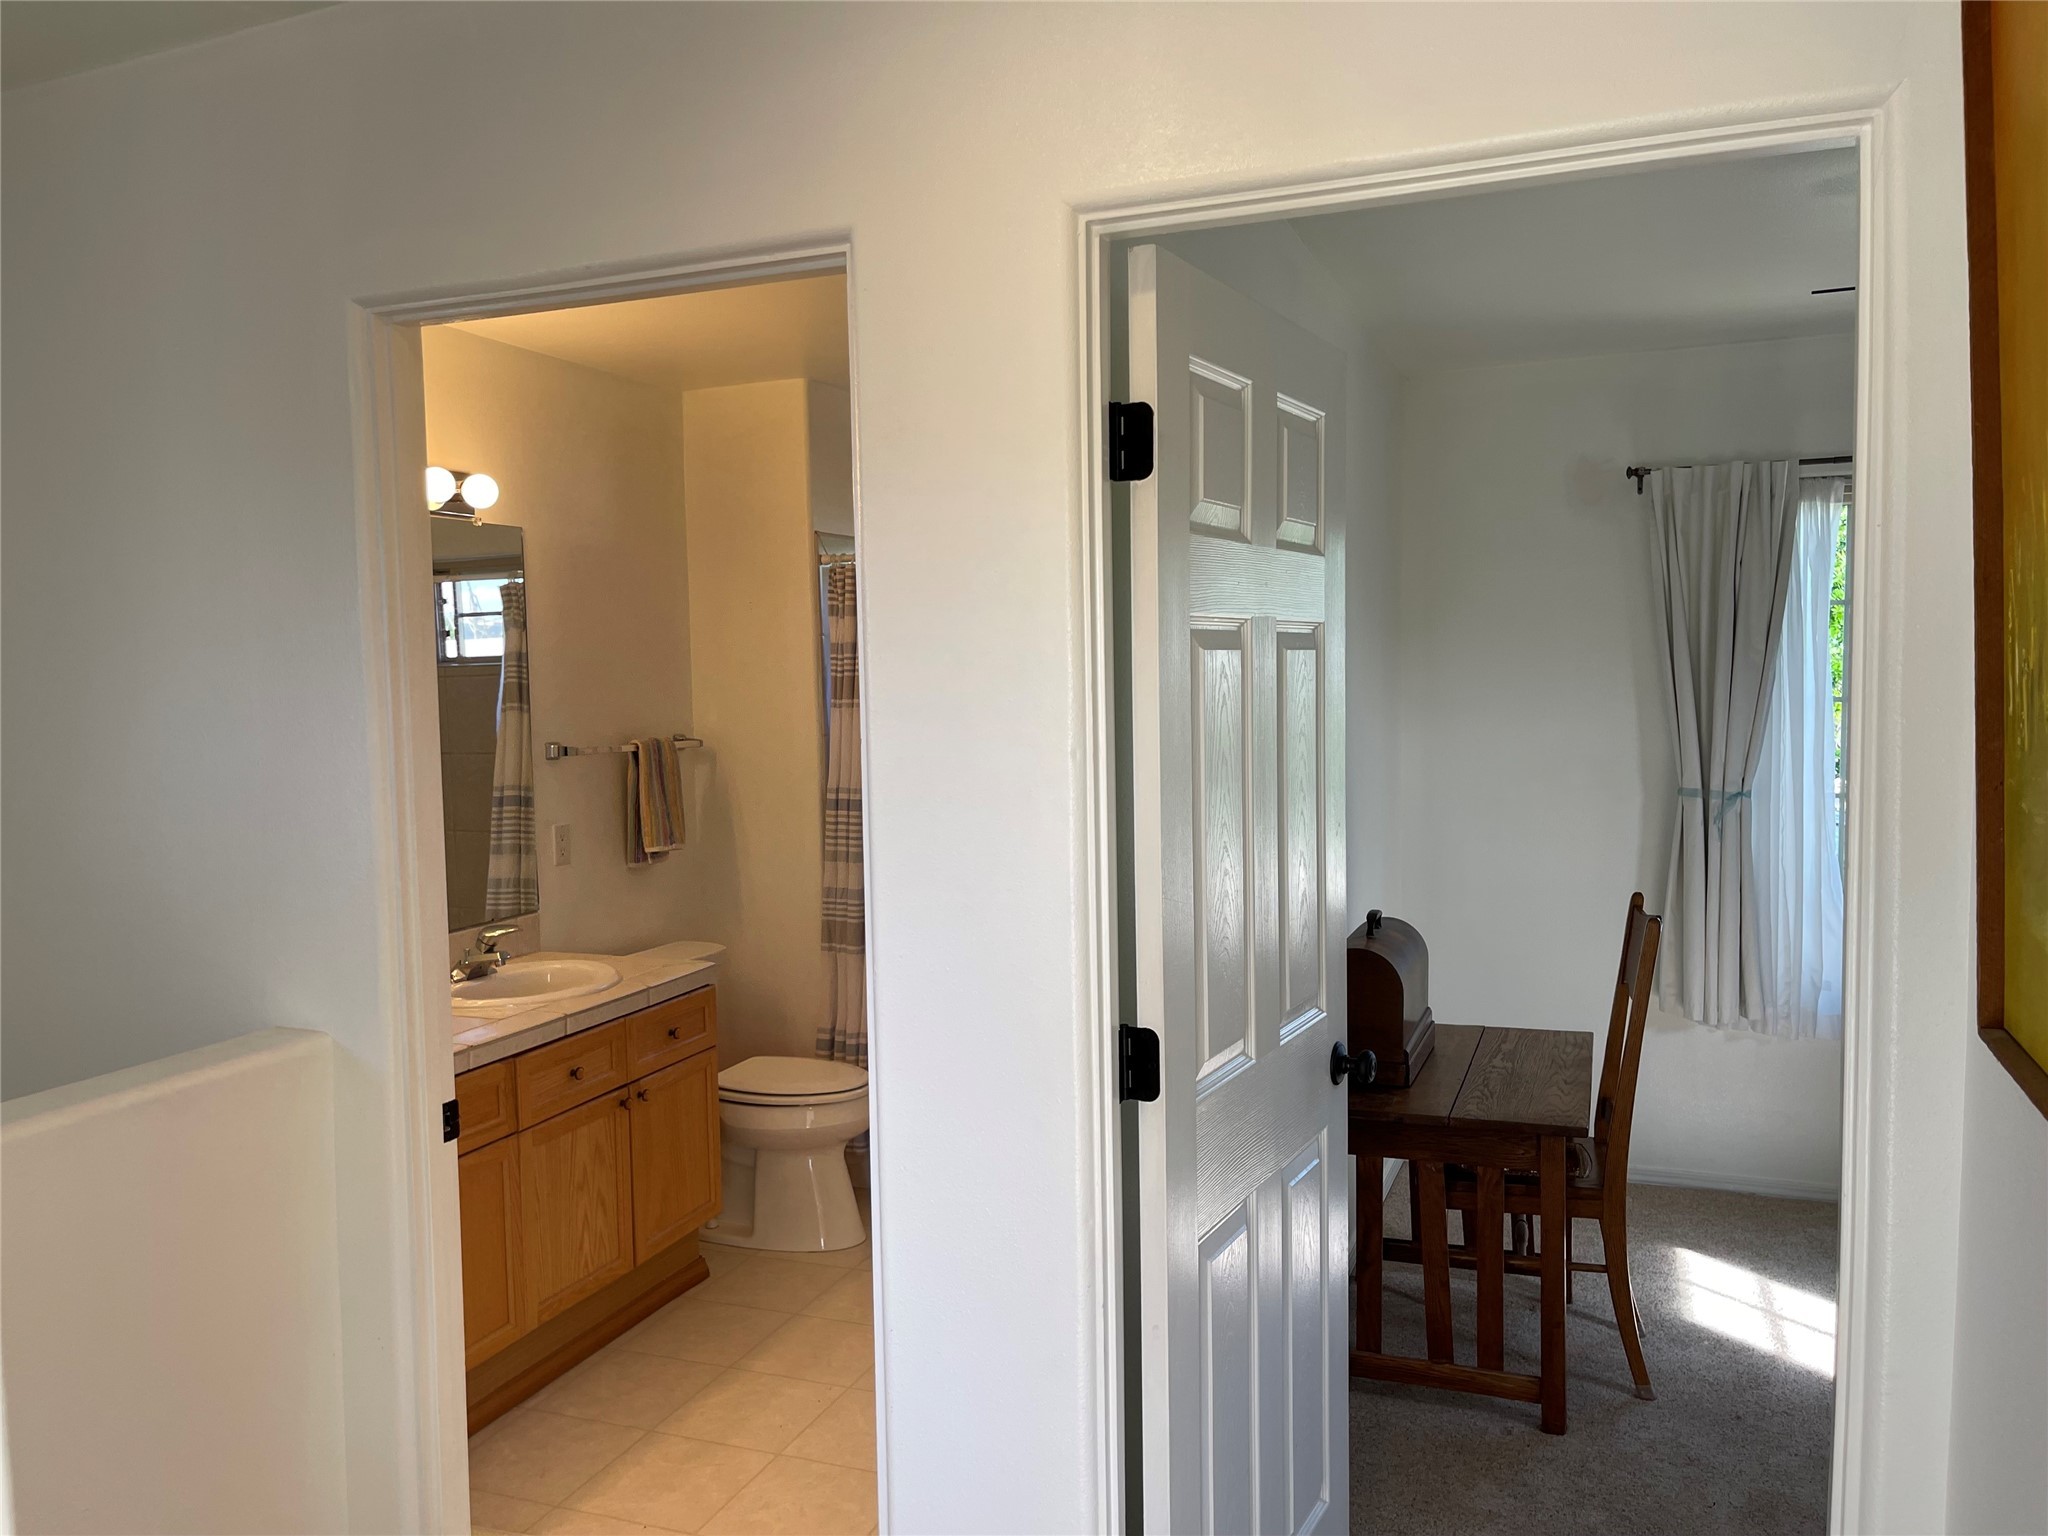 Upstairs full size bathroom, adjacent to upstairs, second and third bedrooms, or office or studio. Space